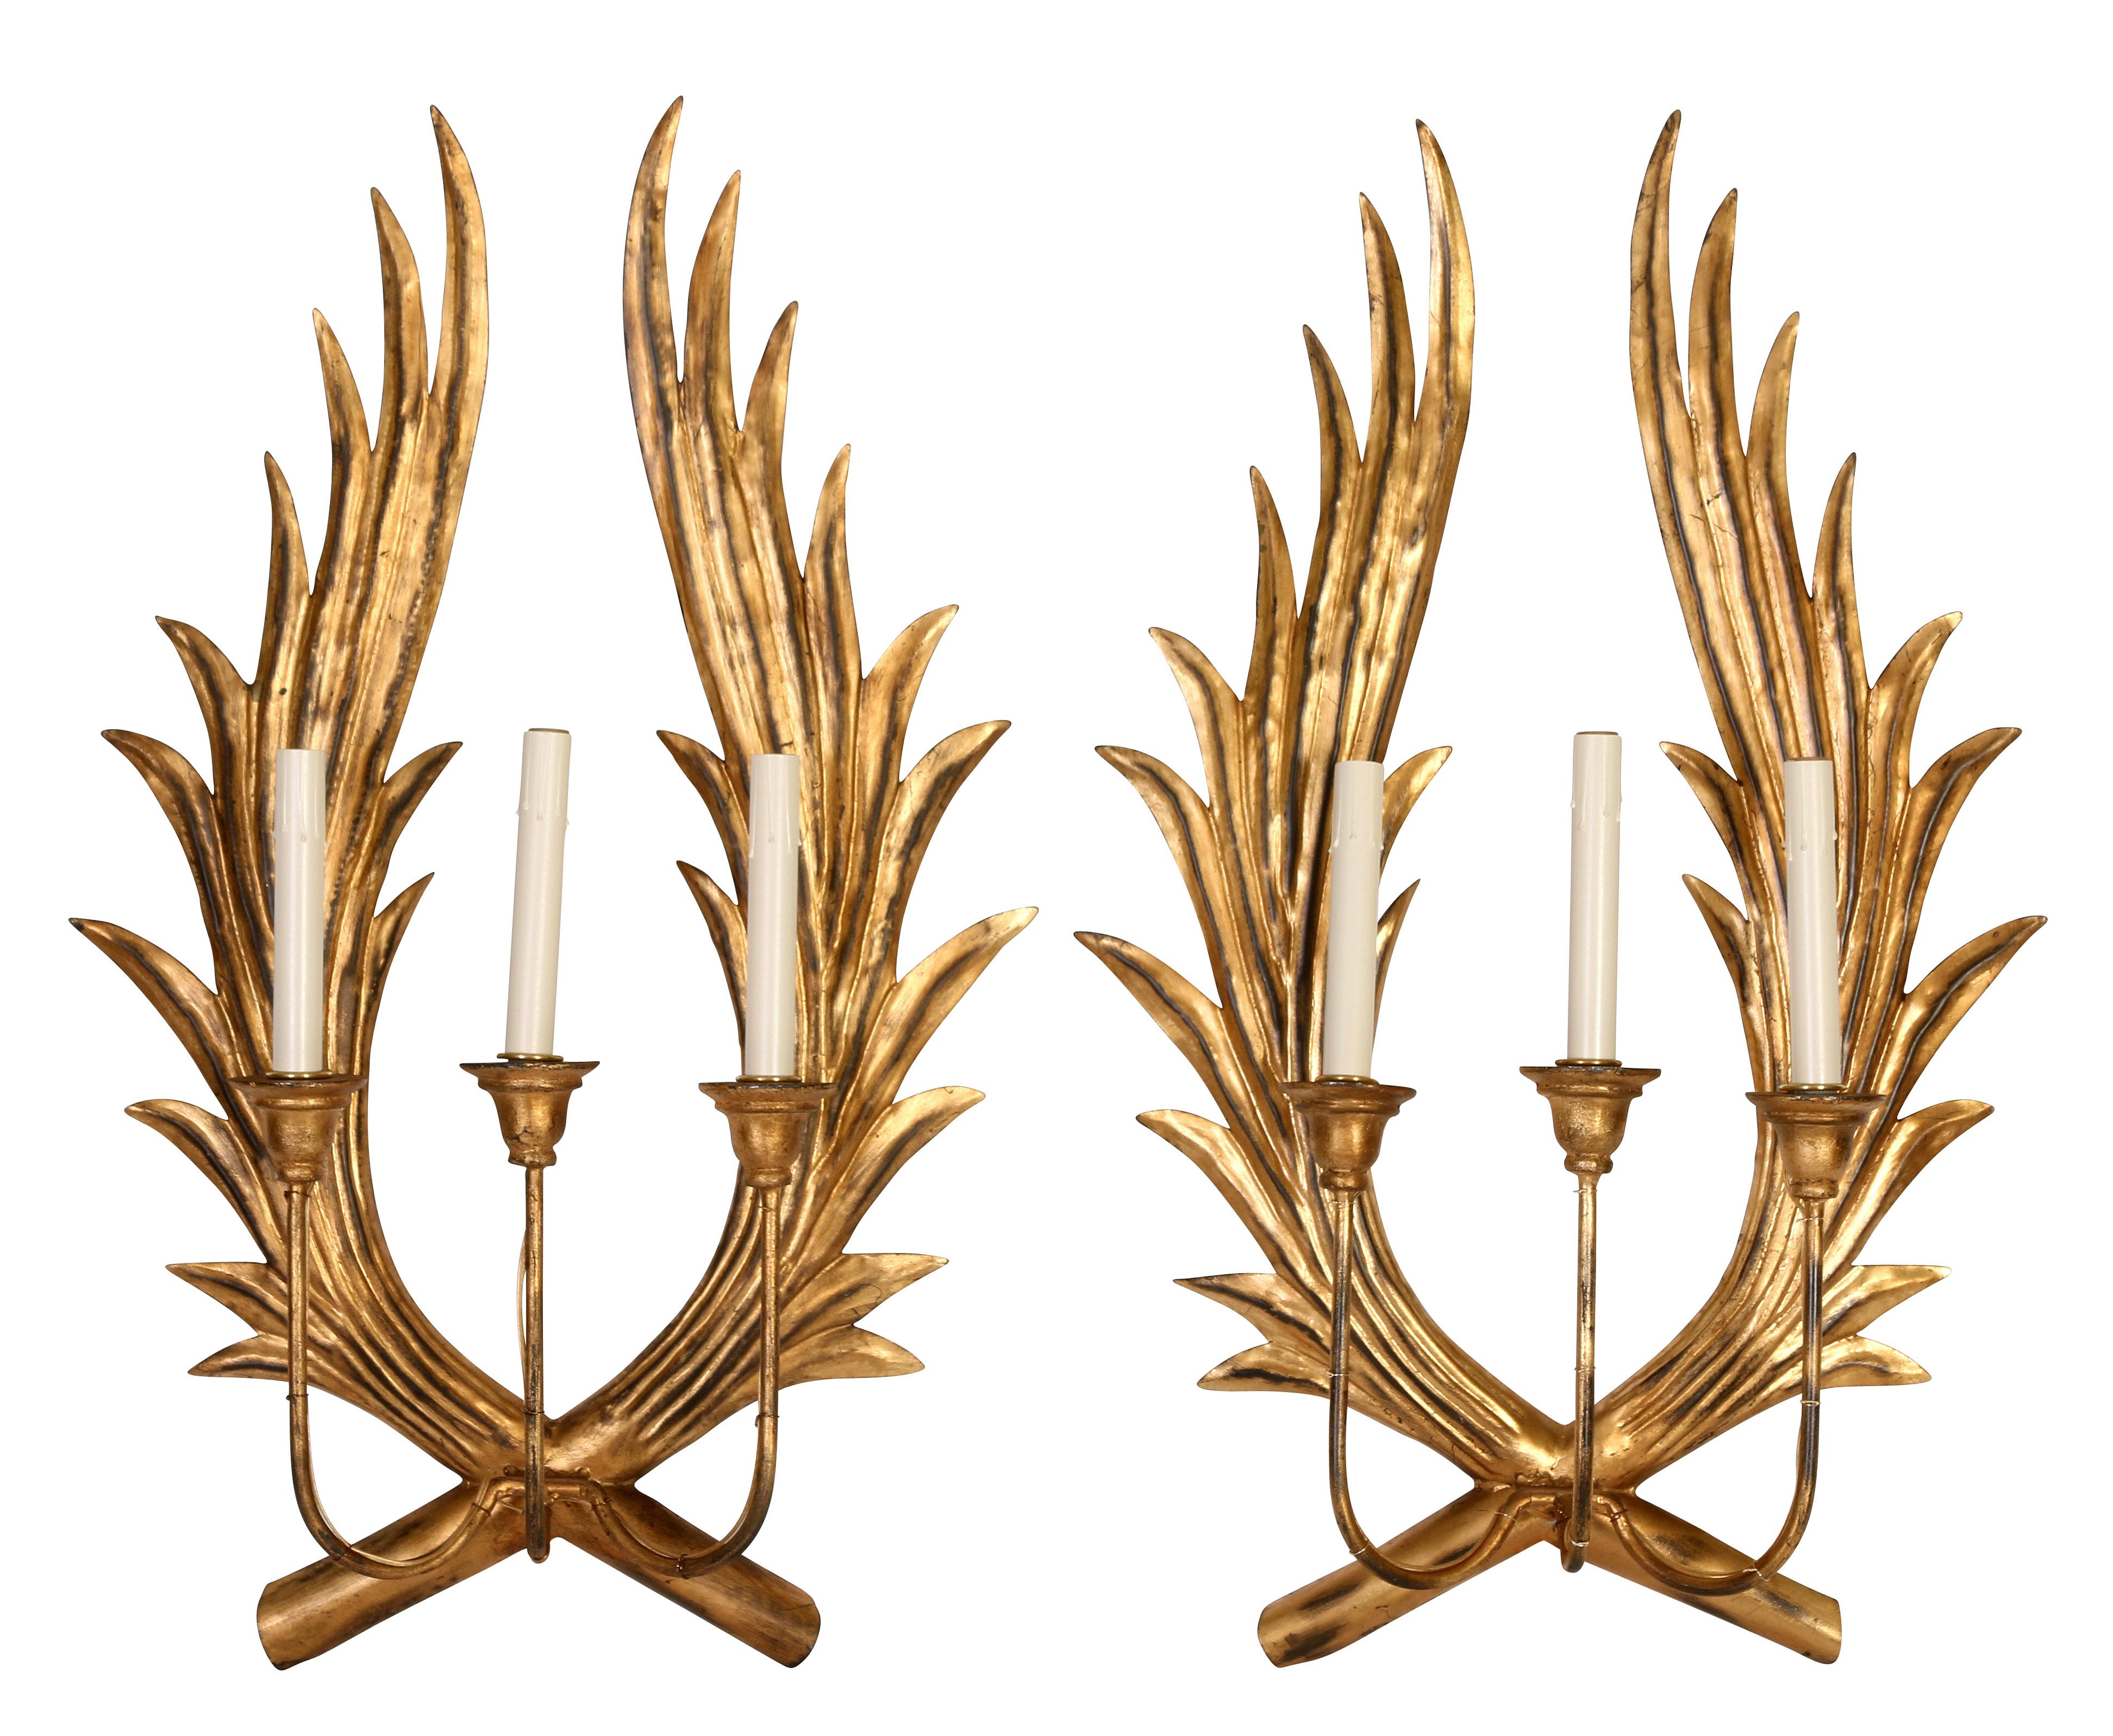 A pair of unusual and striking gilt metal wall sconces with a crossing branches or wings, supporting three arms. A dramatic way to add light to an entrance, dining room or powder room!